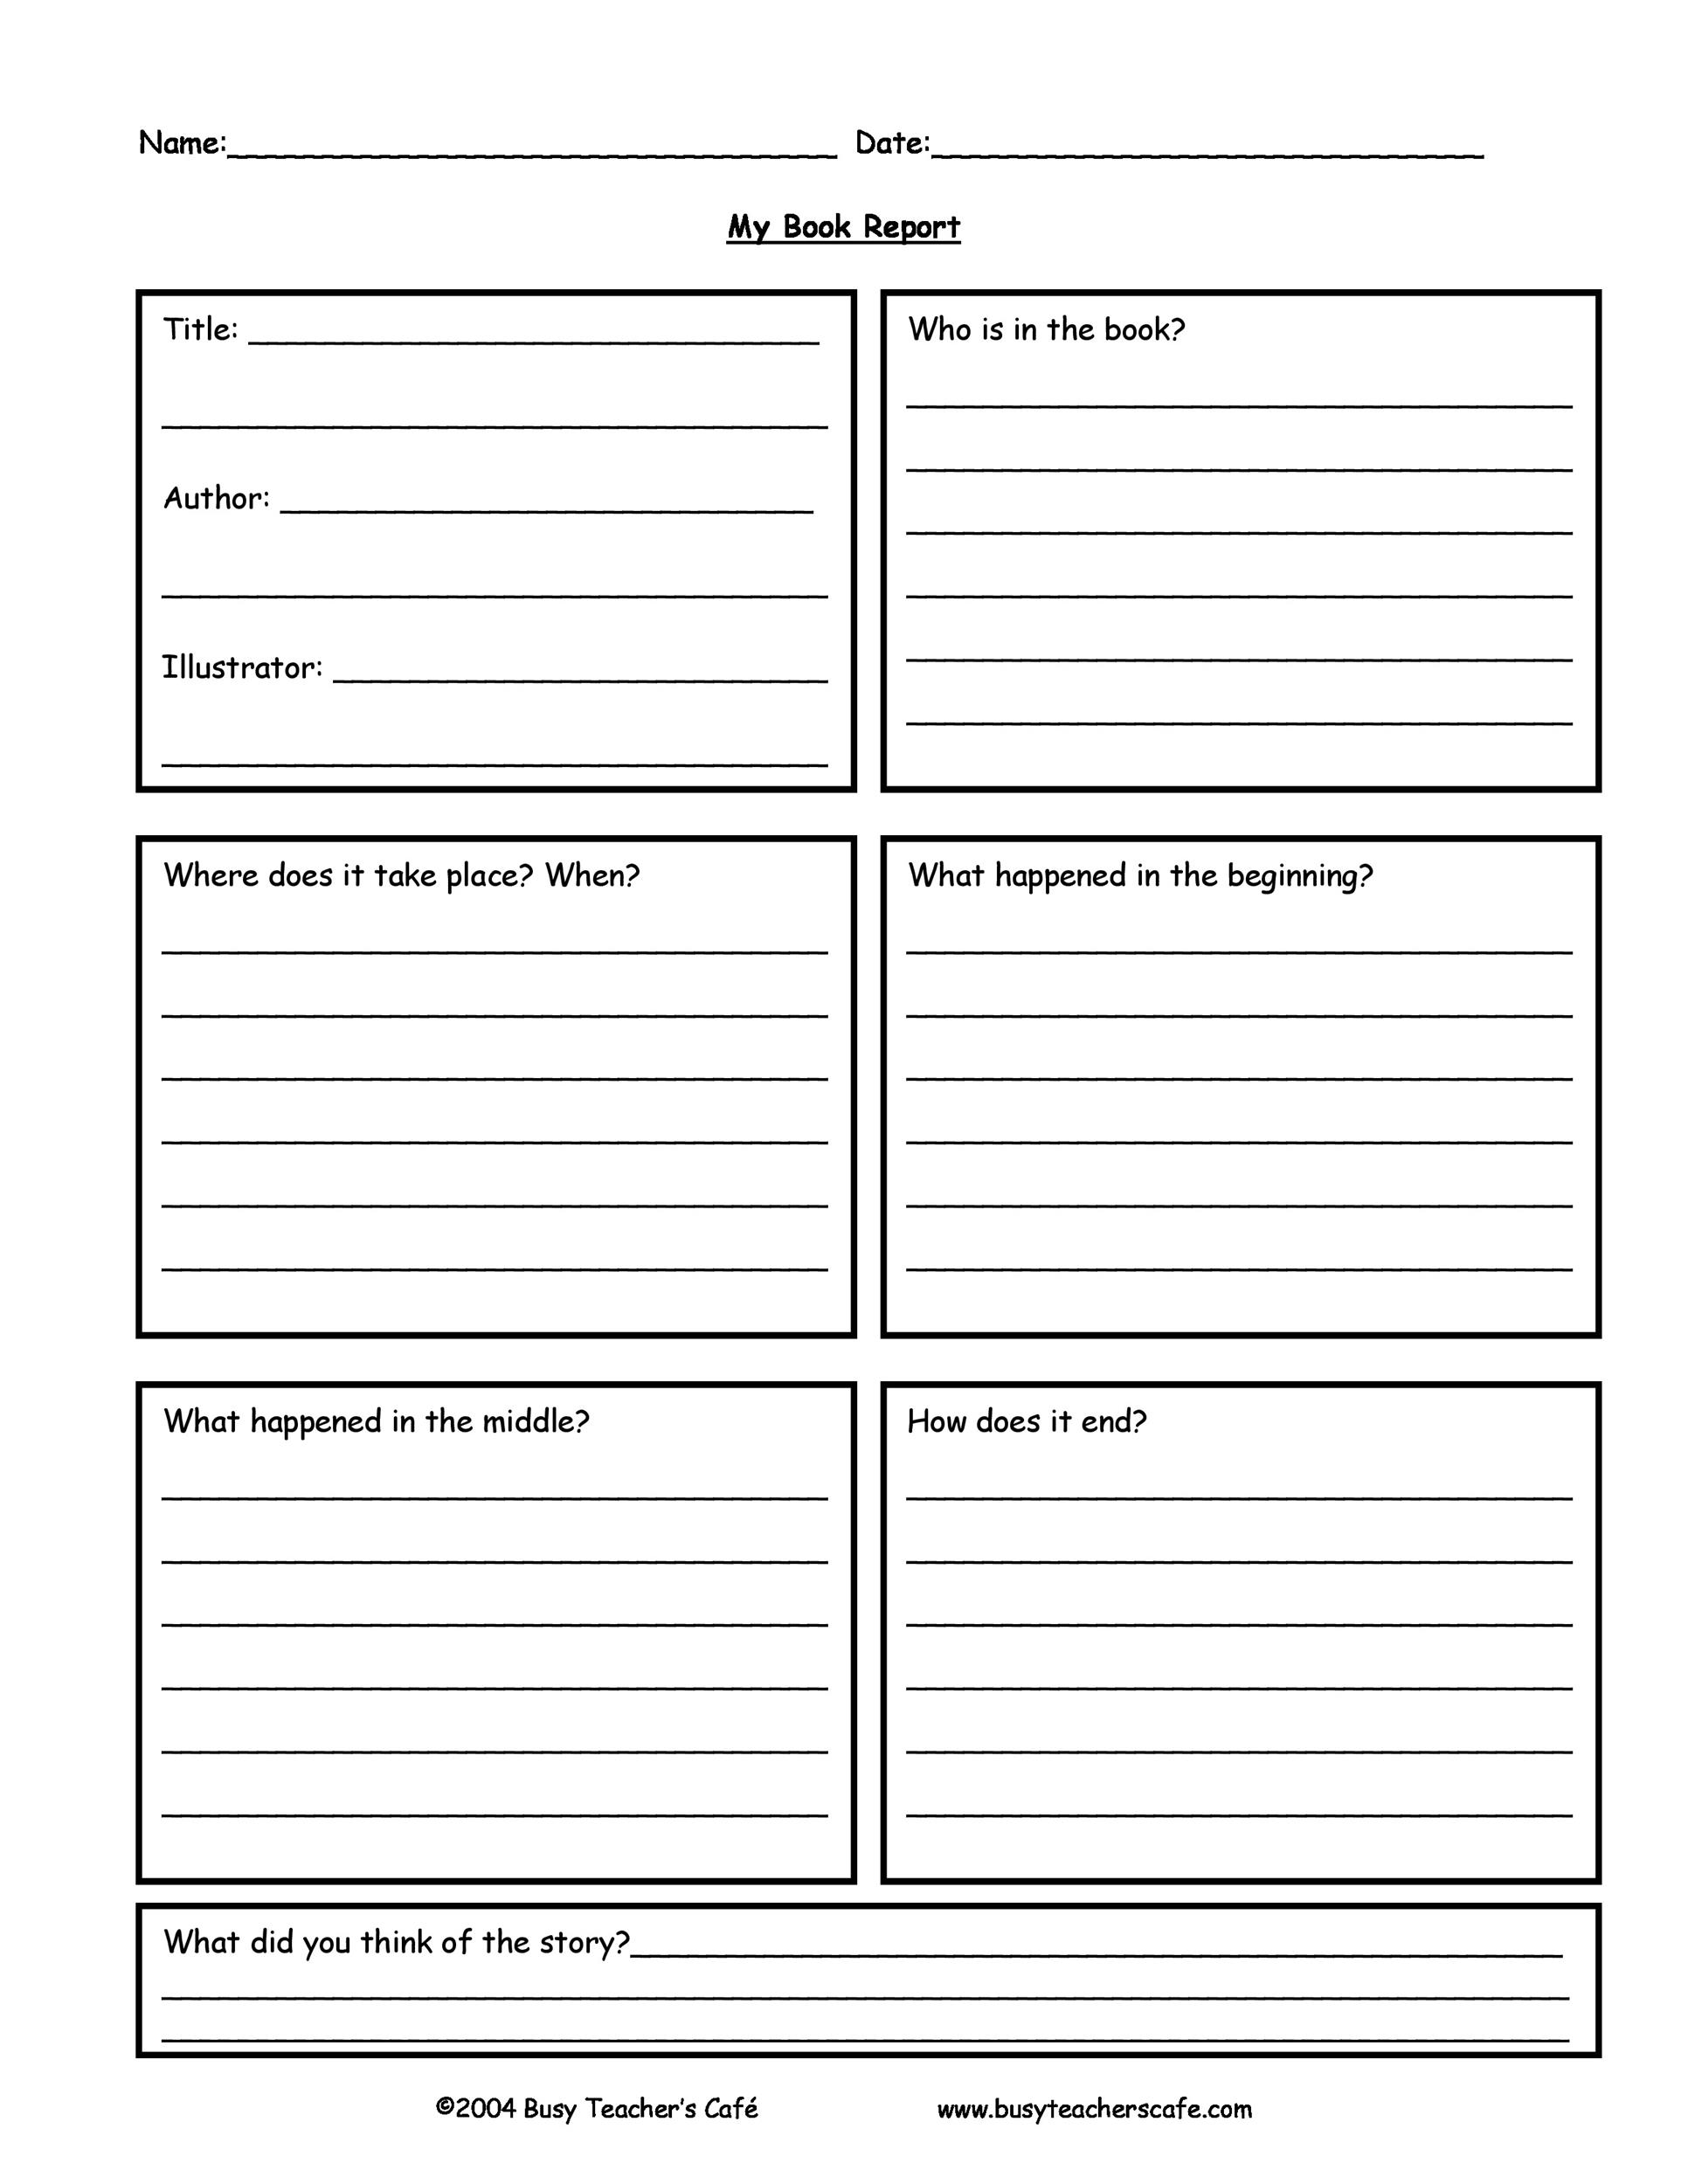 Book Report Template for 7th Graders PROFESSIONAL TEMPLATES